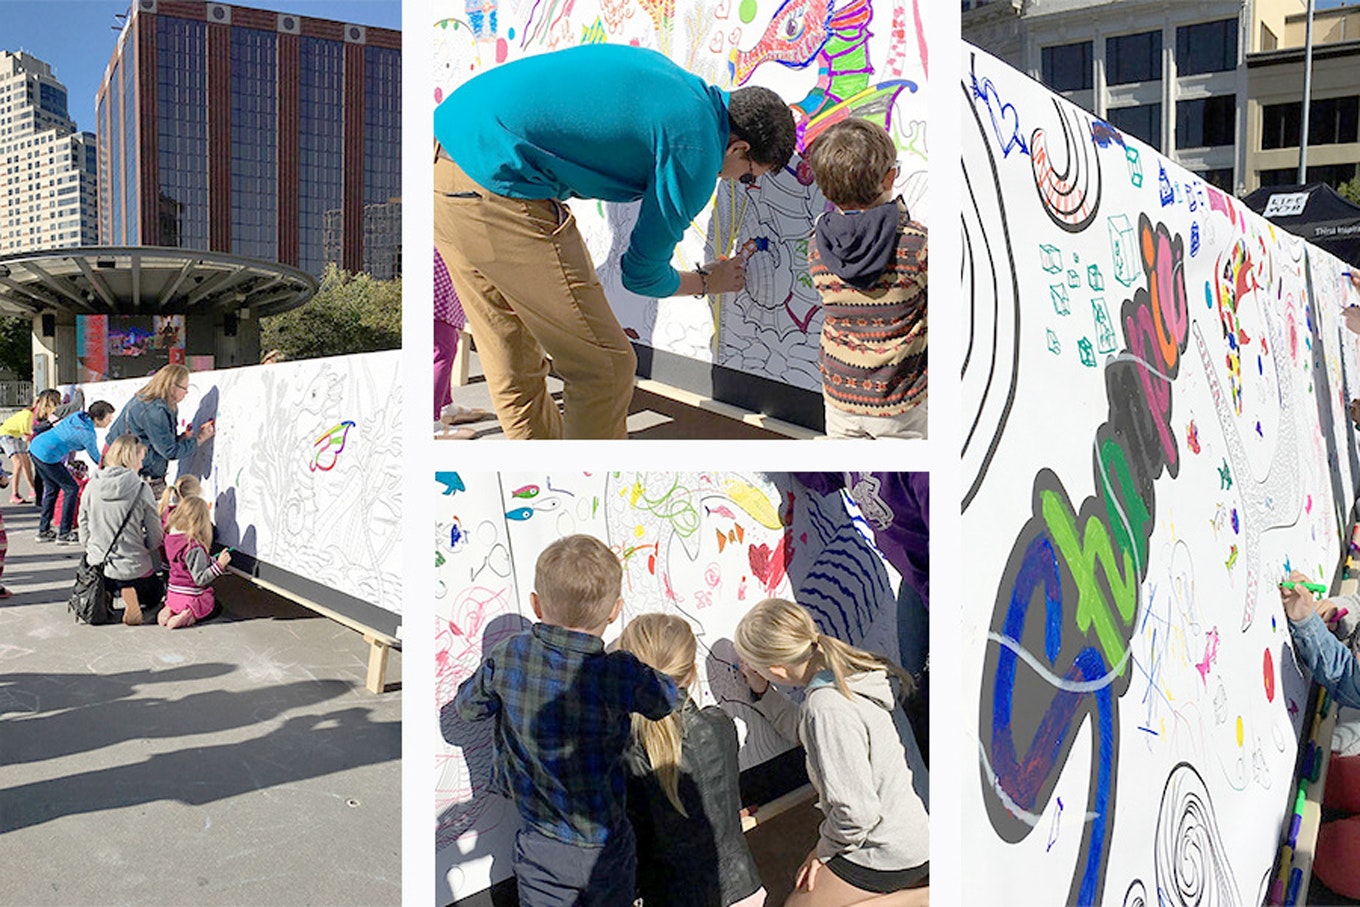 SHARPIE GOES “WALL”-IN AT ARTPRIZE EVENT